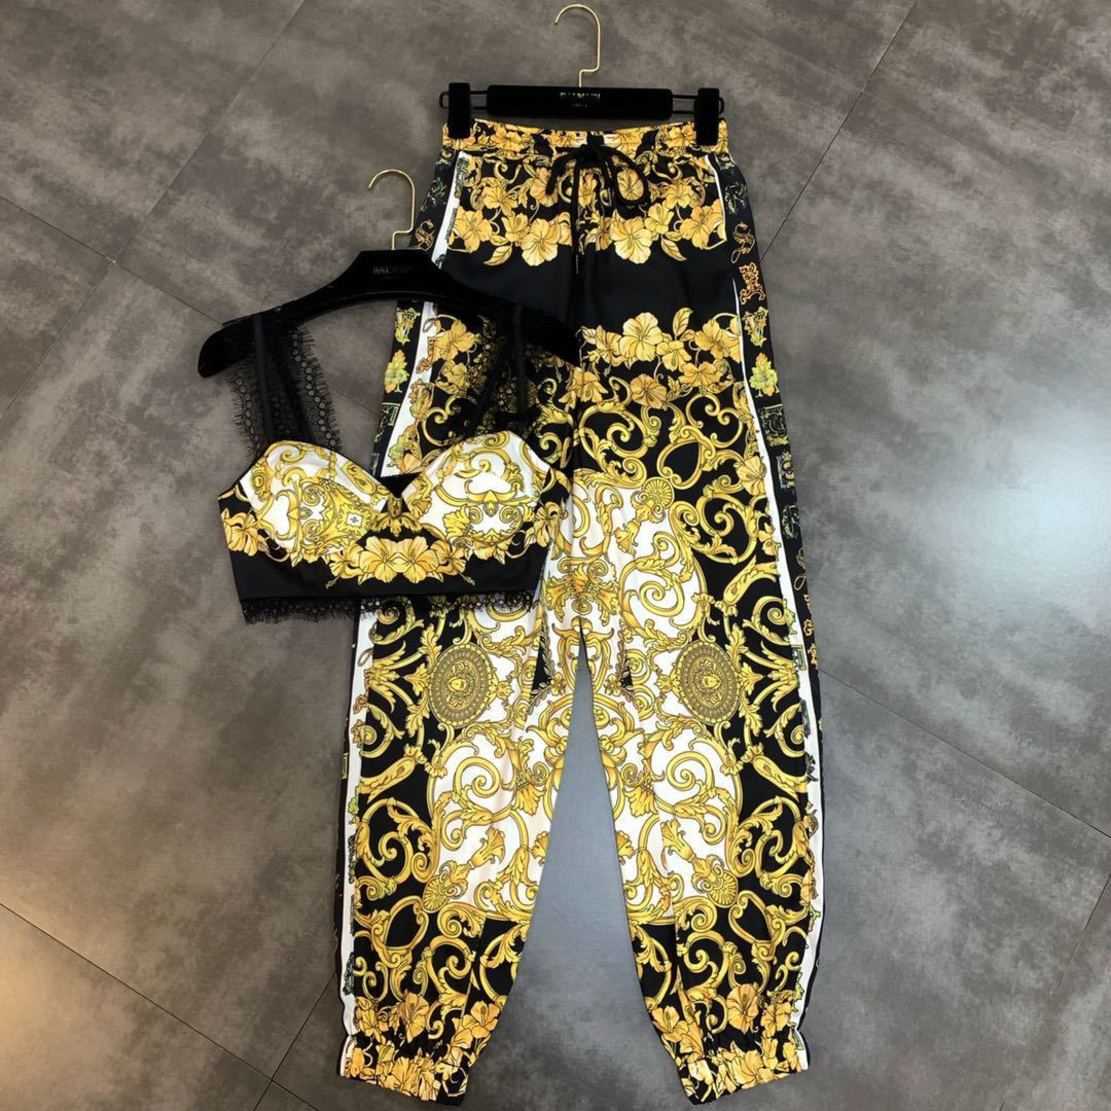 

Dew Versage Long vercace Navel Summer Two Yellow Floral Camis Print Pants Lace Piece Short Women Sets MF874 NZ6F, As photo